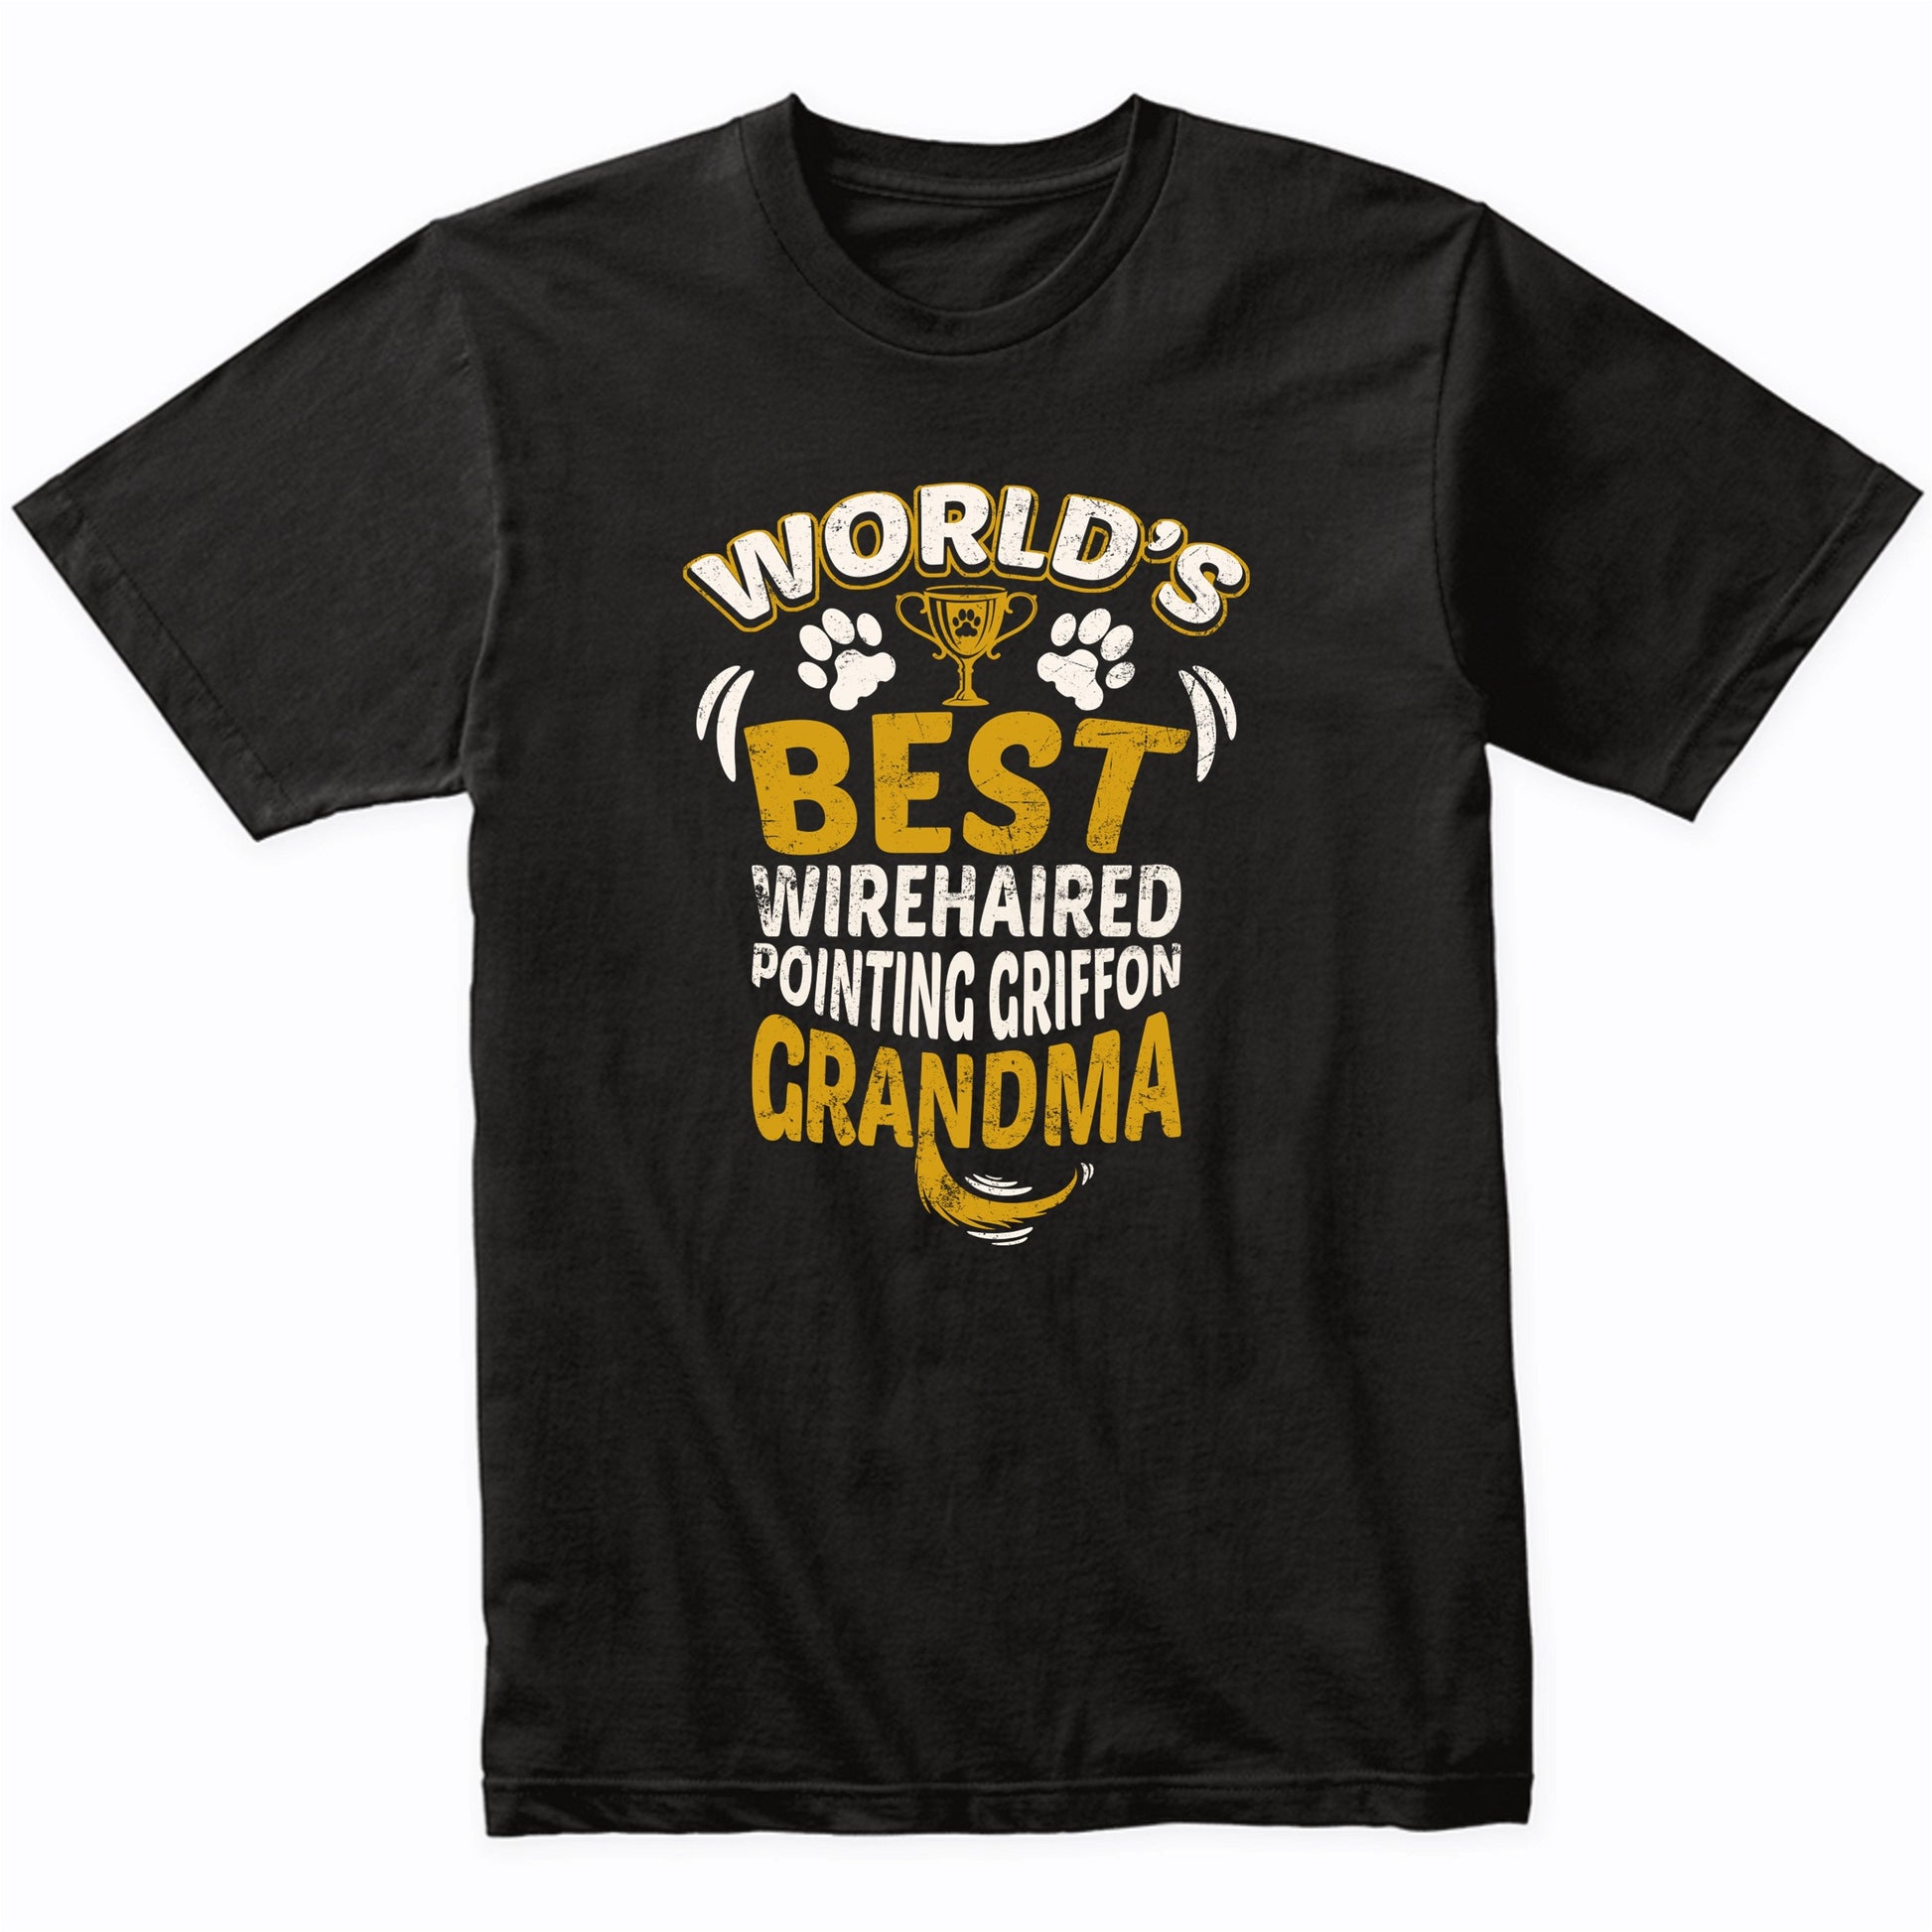 World's Best Wirehaired Pointing Griffon Grandma T-Shirt